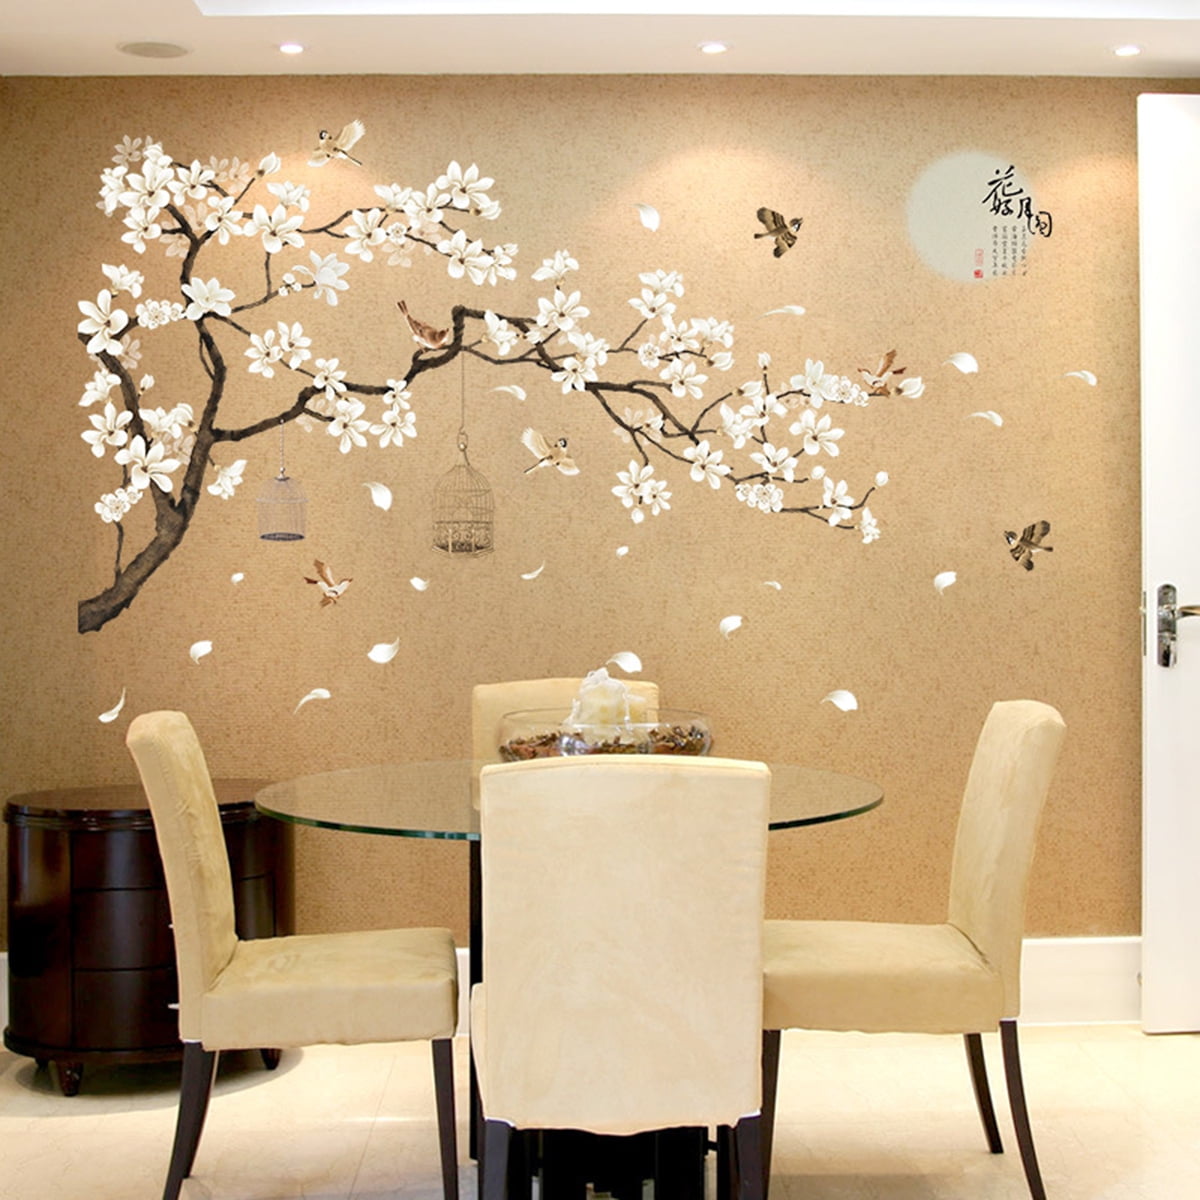 Large Family Women Wall Decals 3D Acrylic Wall Stickers Mural Home Bedroom Decor 